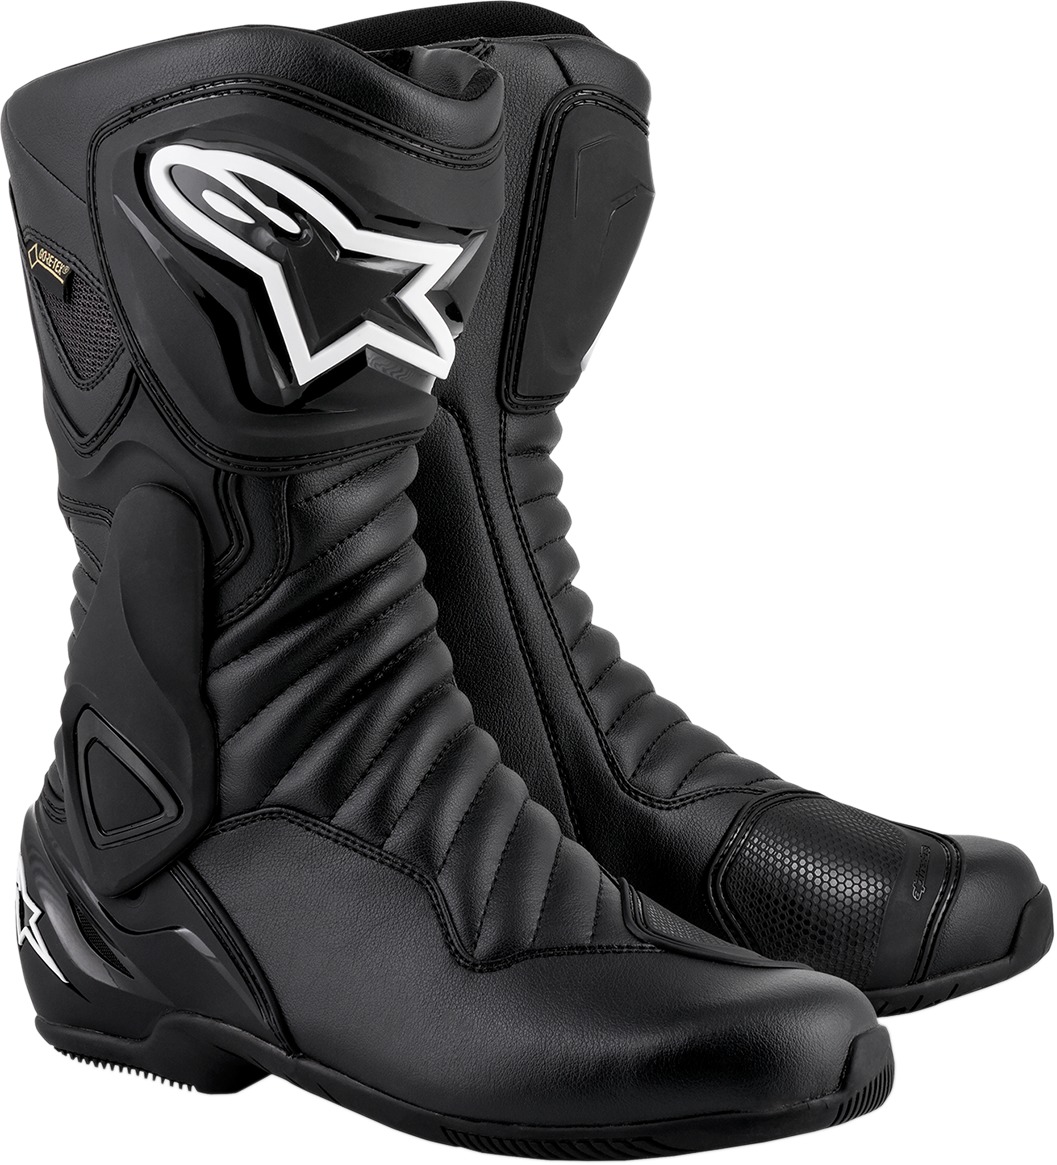 SMX-6 GTX Street Riding Boots Black US 7.5 - Click Image to Close